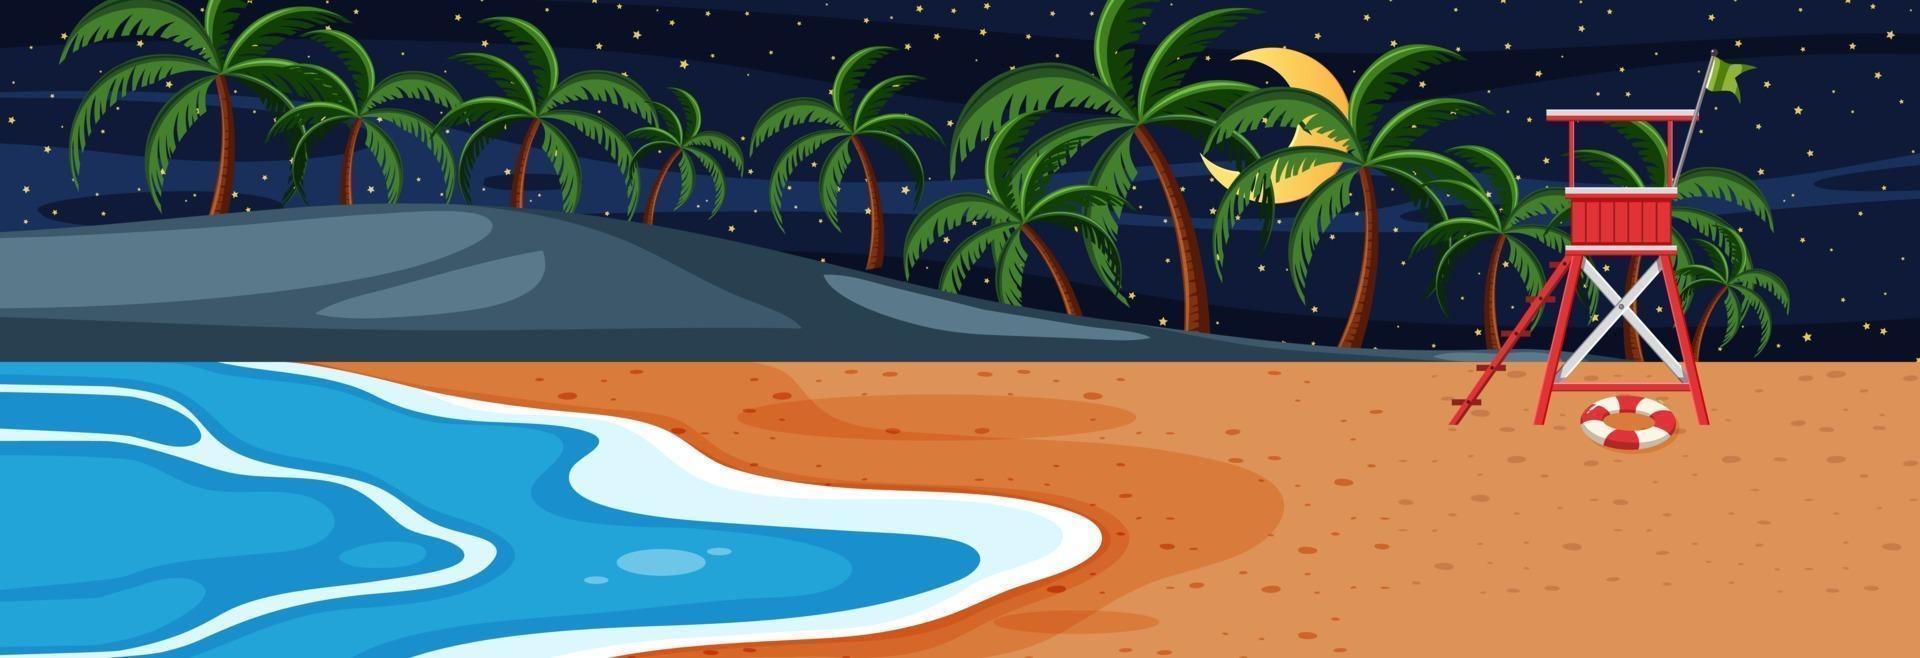 Beach horizontal scene at night time with many palm trees vector